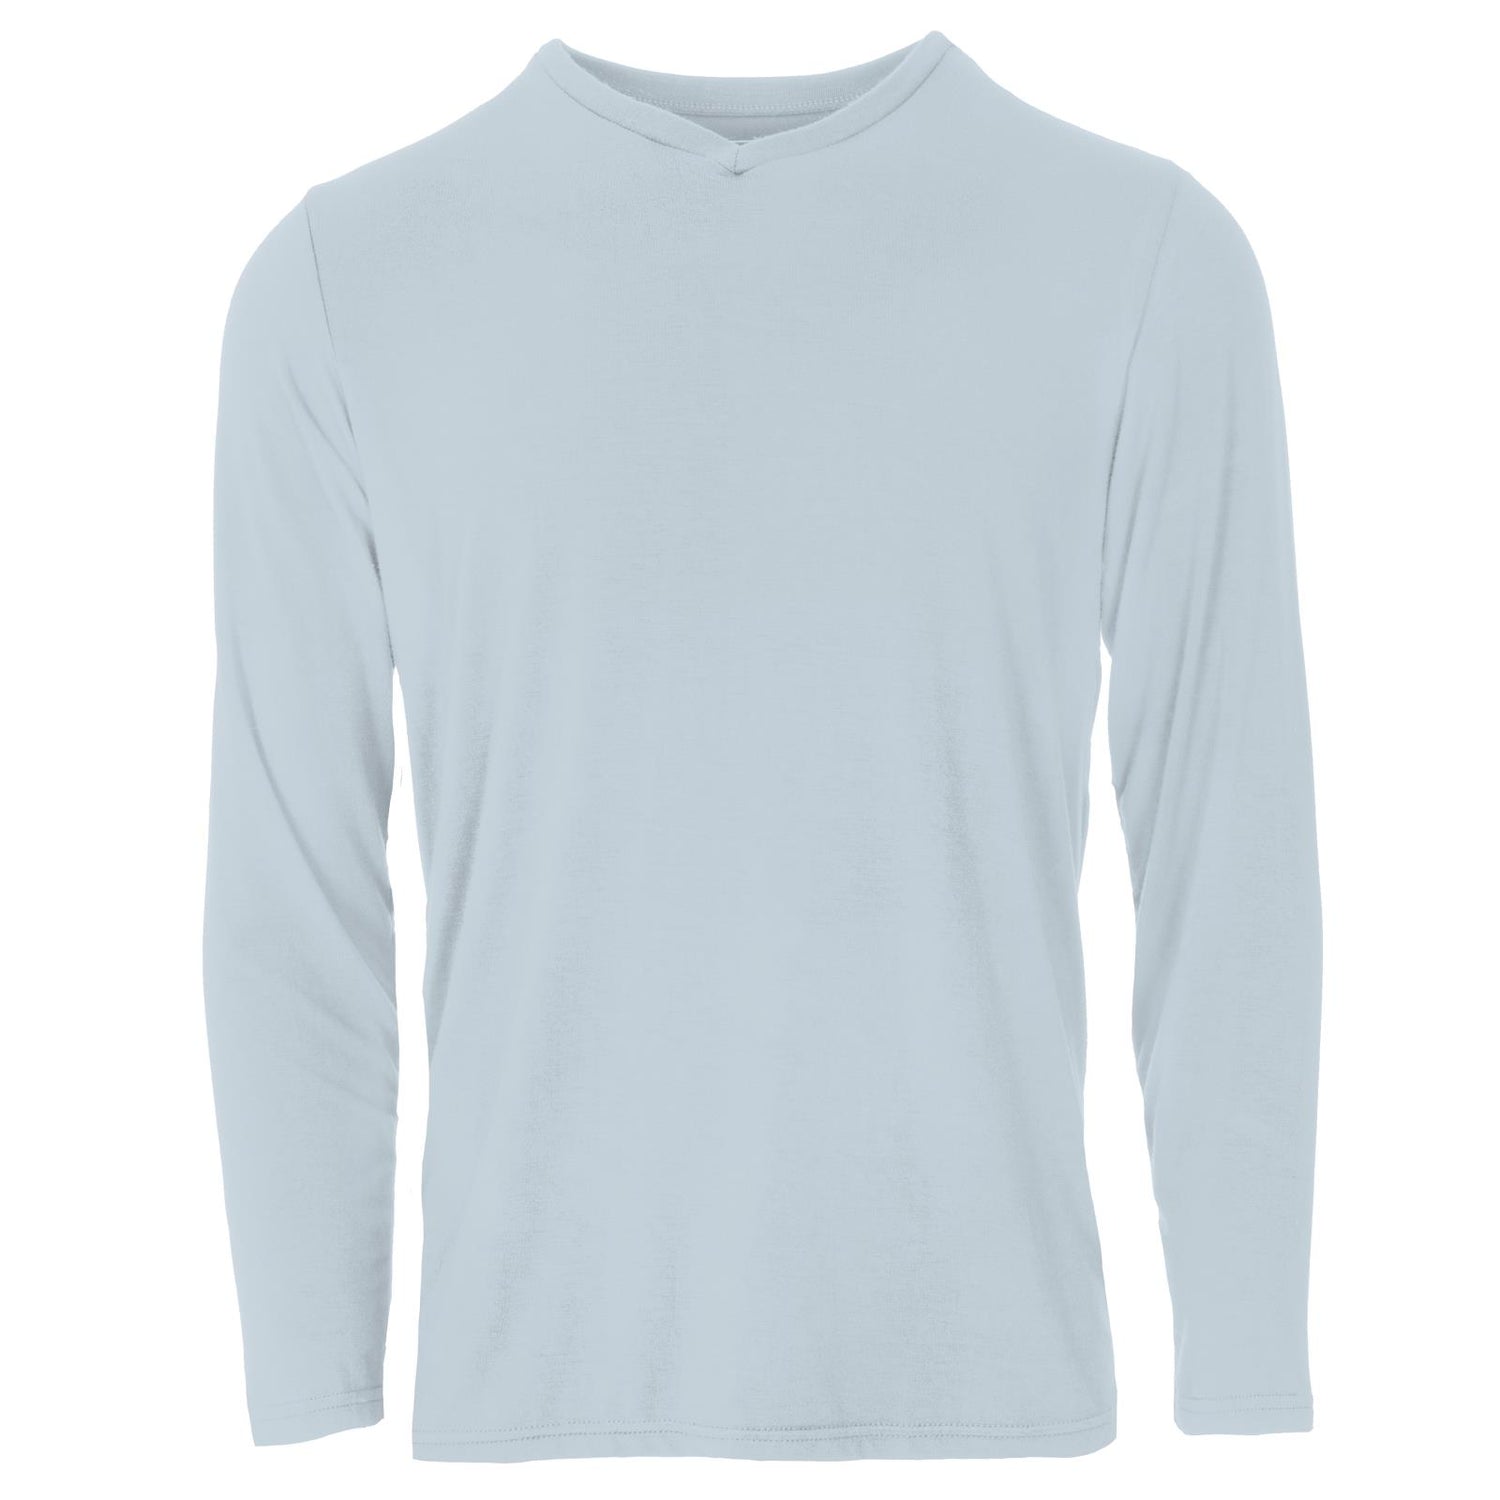 Men's Solid Long Sleeve V-Neck Tee in Illusion Blue